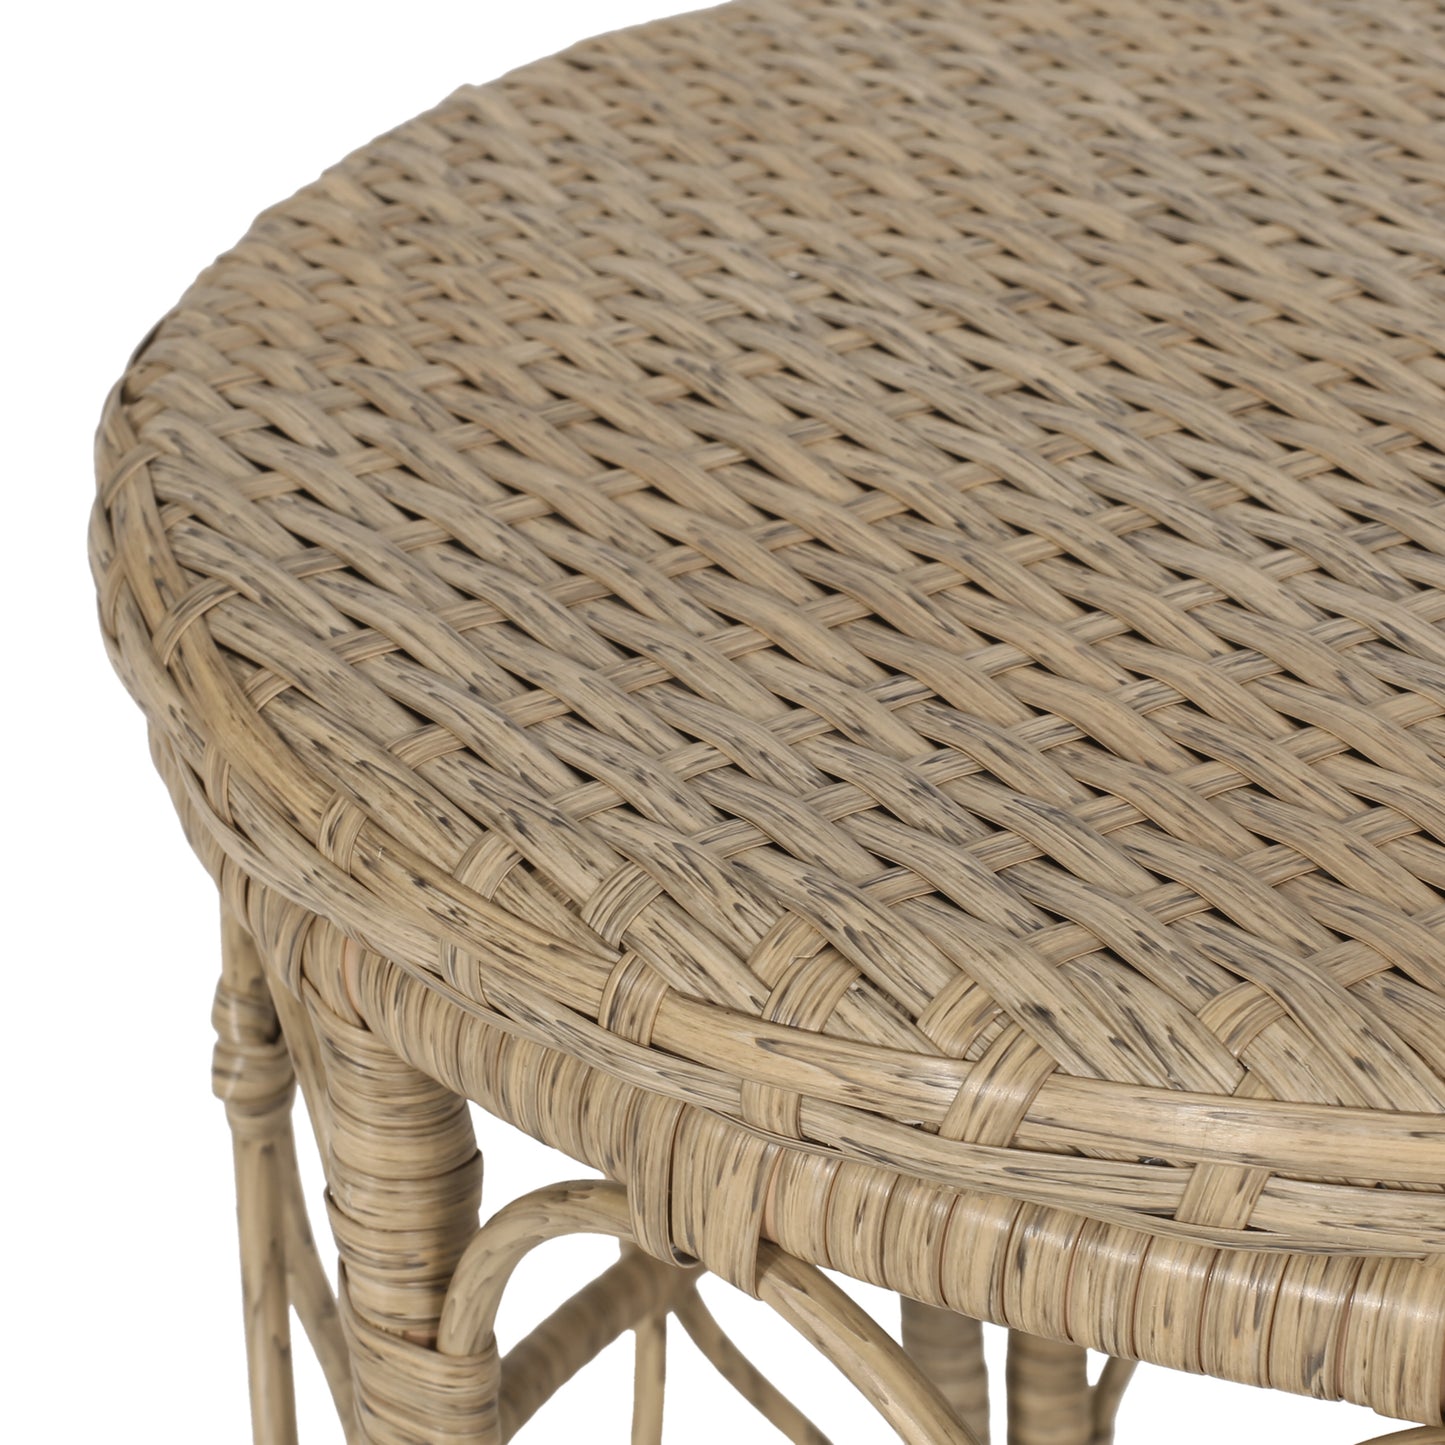 Colmar Outdoor Wicker 3 Piece Chat Set with Cushions, Light Brown and Beige